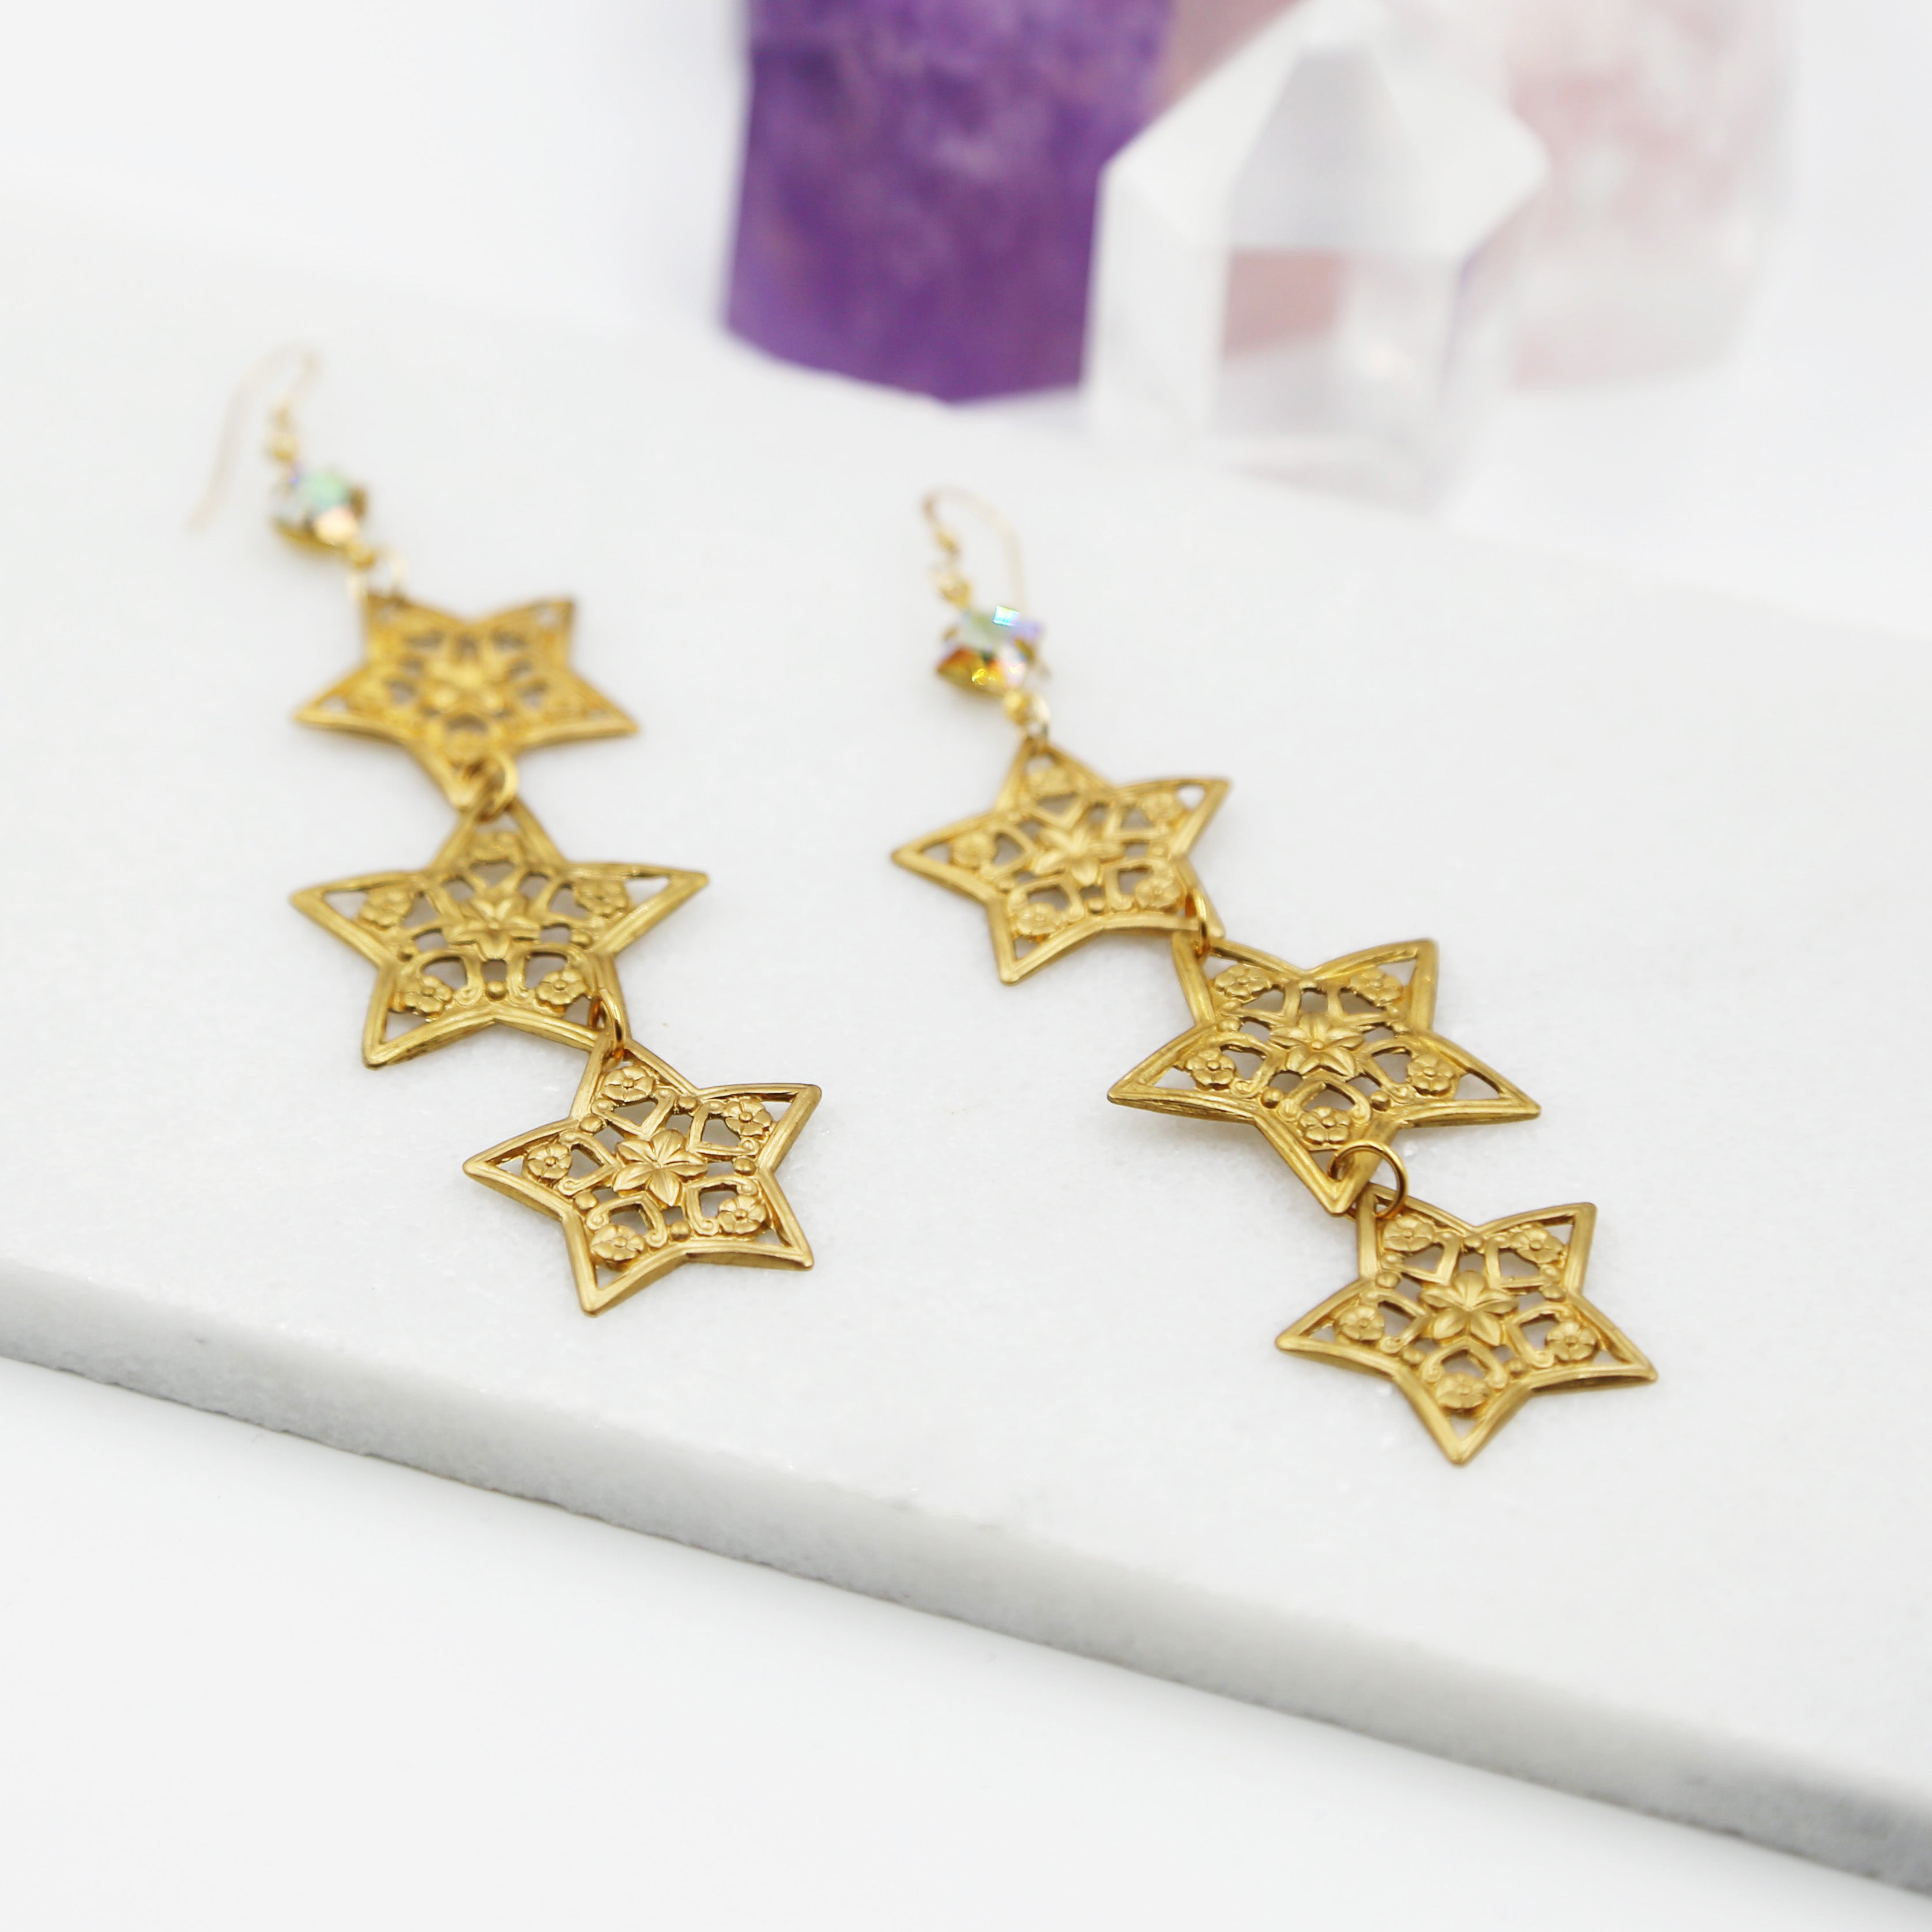 Buy 10pcs Real Gold Plated Star Earrings,ear Stud,star Post Earring With  Loop, Ear Wire,earrings Accessories,diy Earring Attachment Online in India  - Etsy